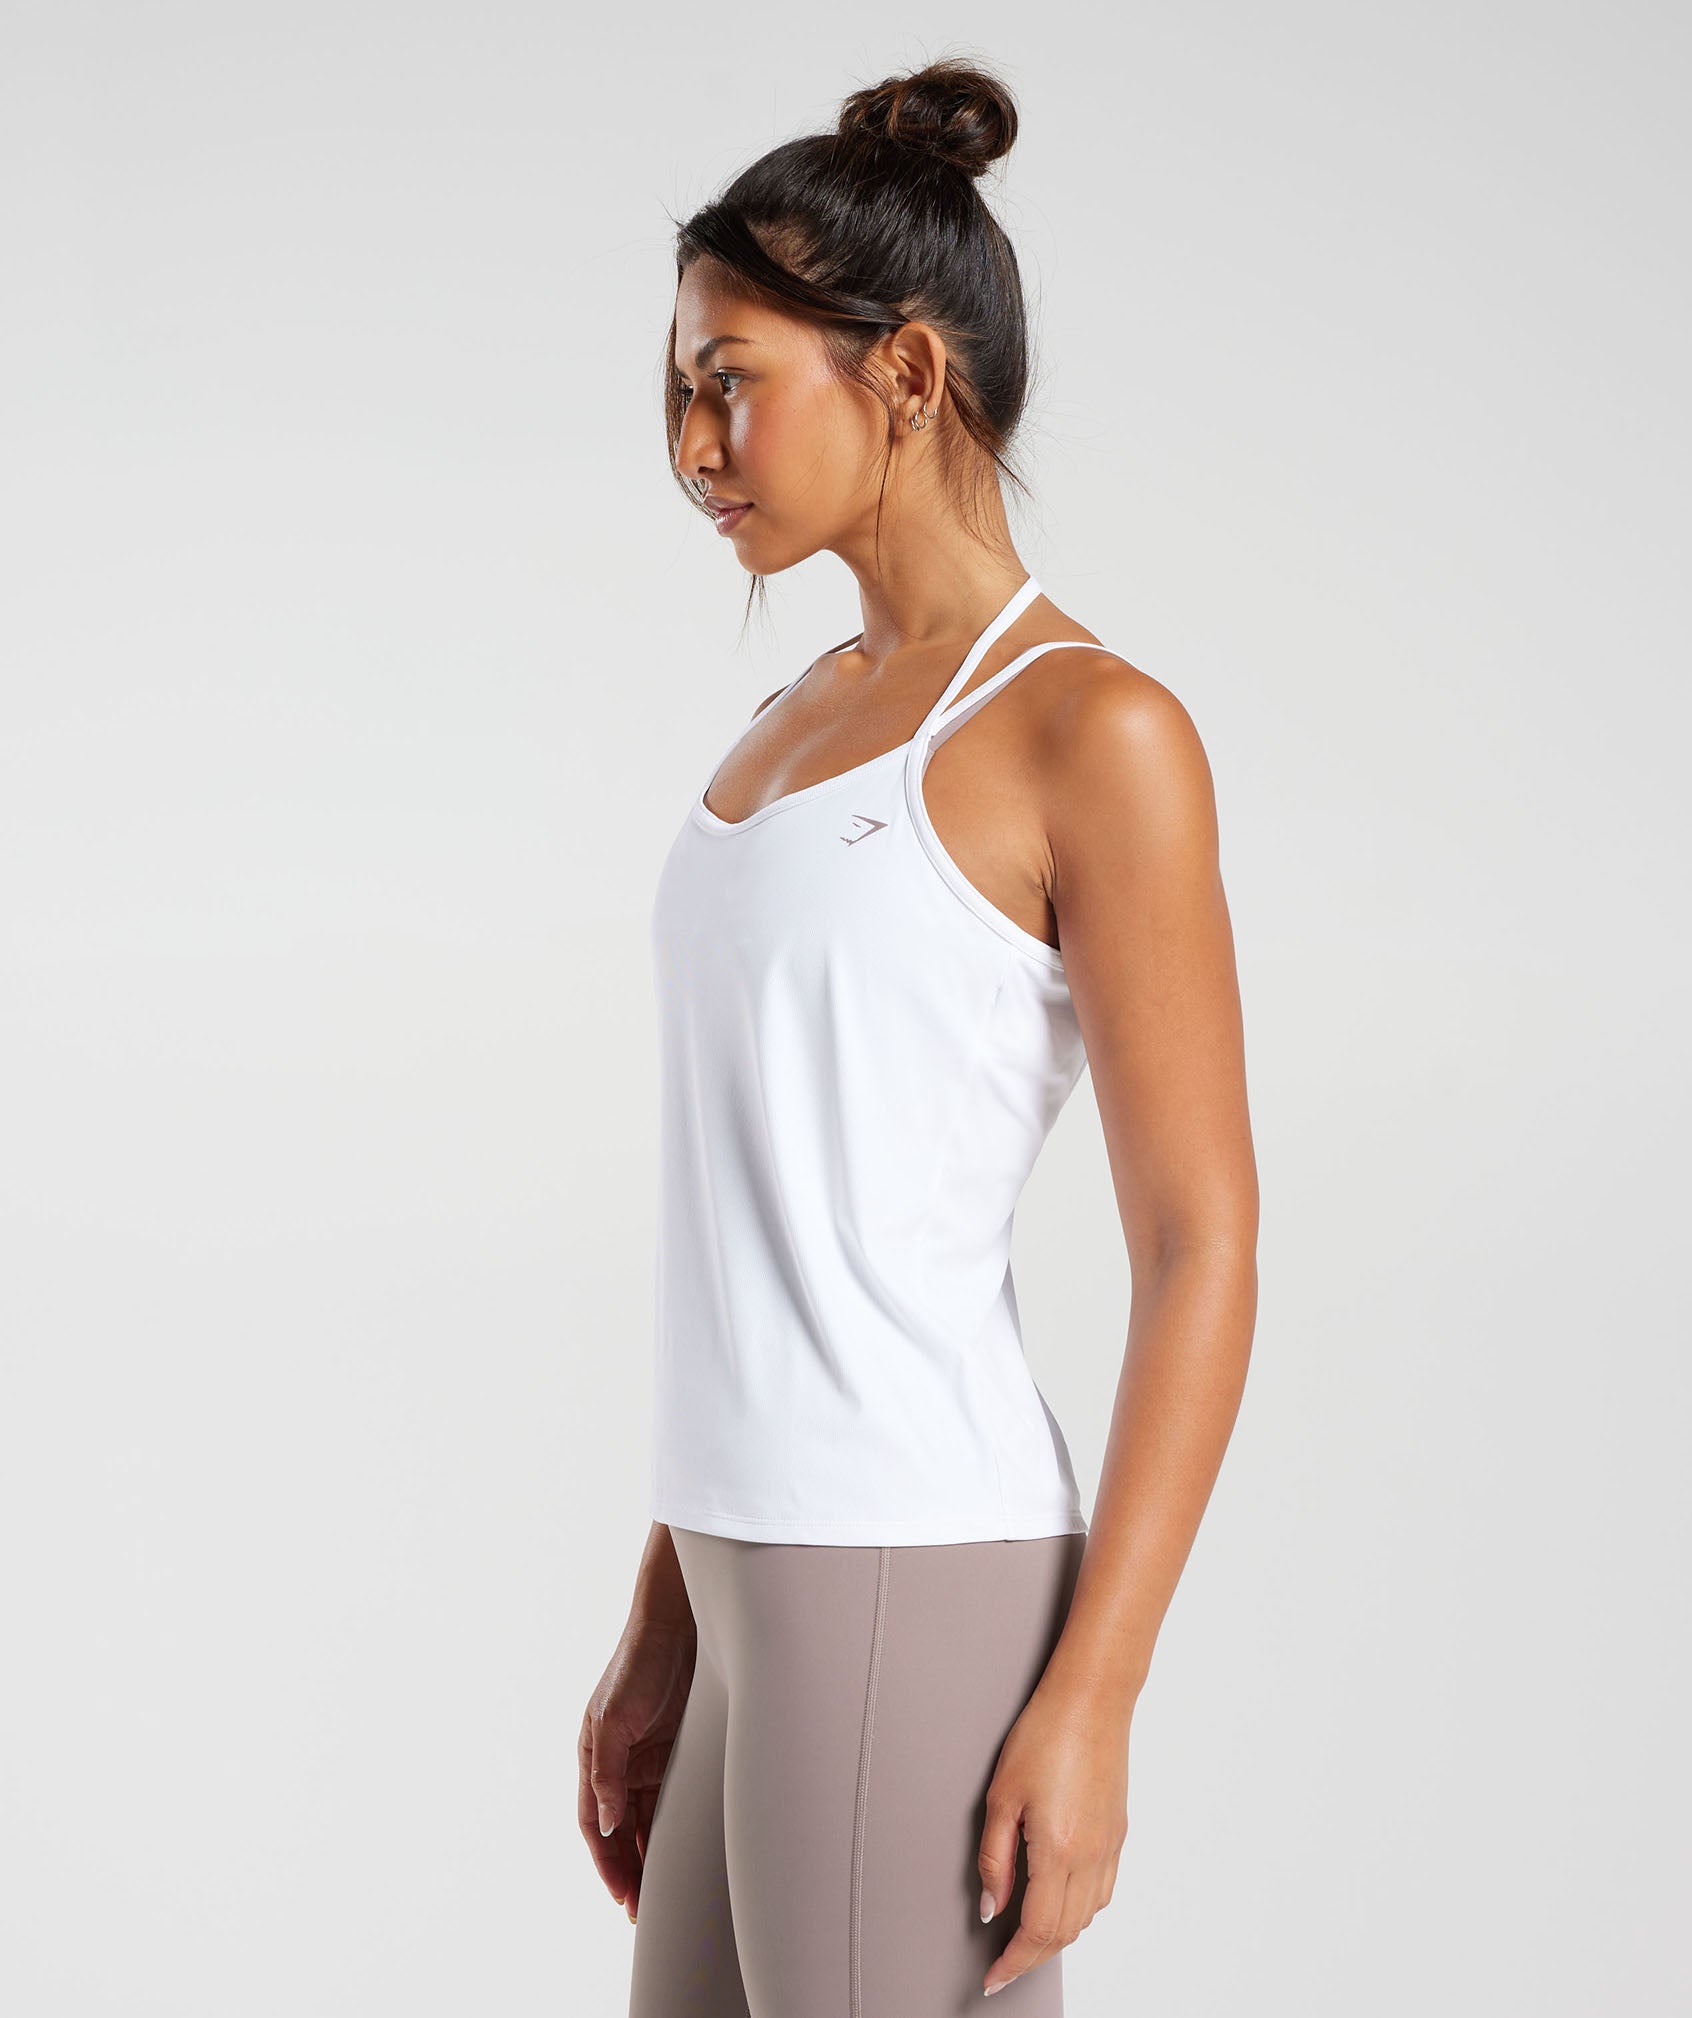 Very Sexy Low Scoop Neck Seamless Stretch Racerback Yoga Tank Top White  S/M/L